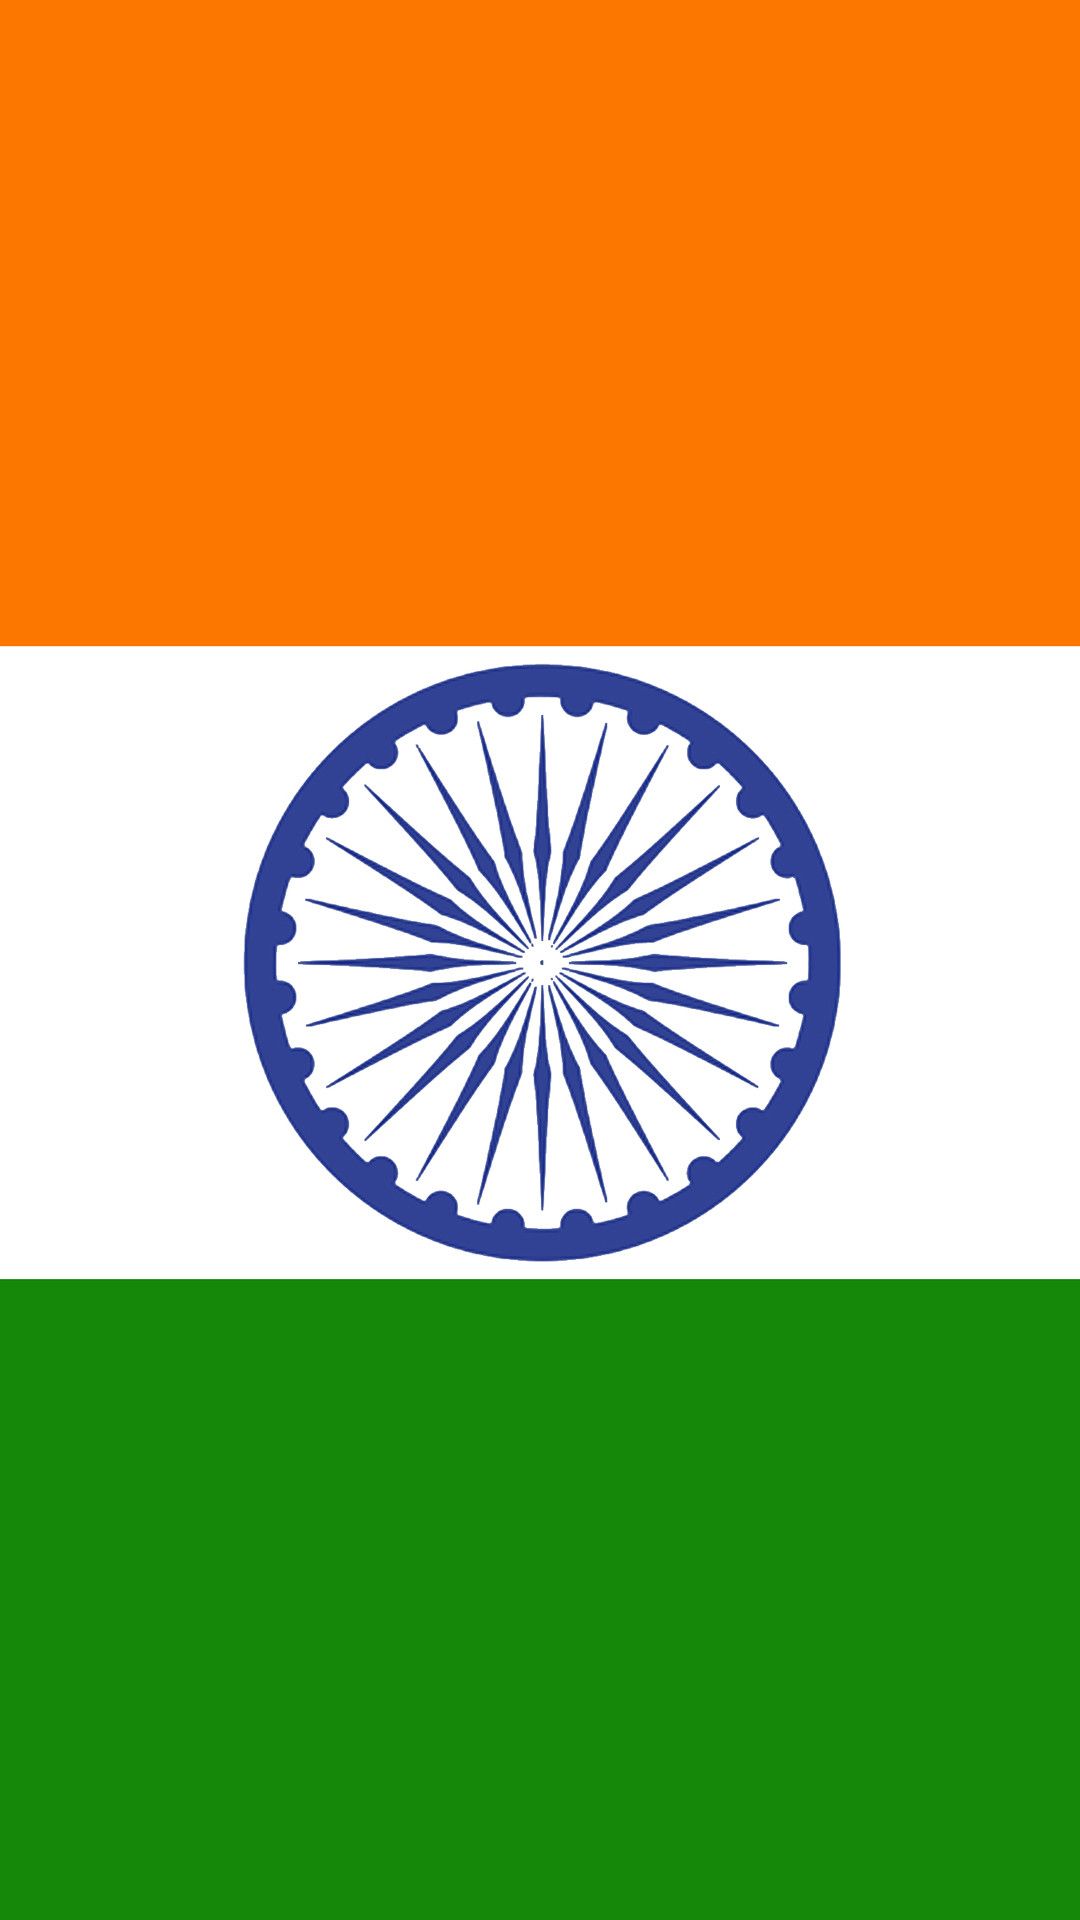 1080x1920 India Flag for Mobile Phone Wallpaper 01 of 17 Pictures – Tiranga